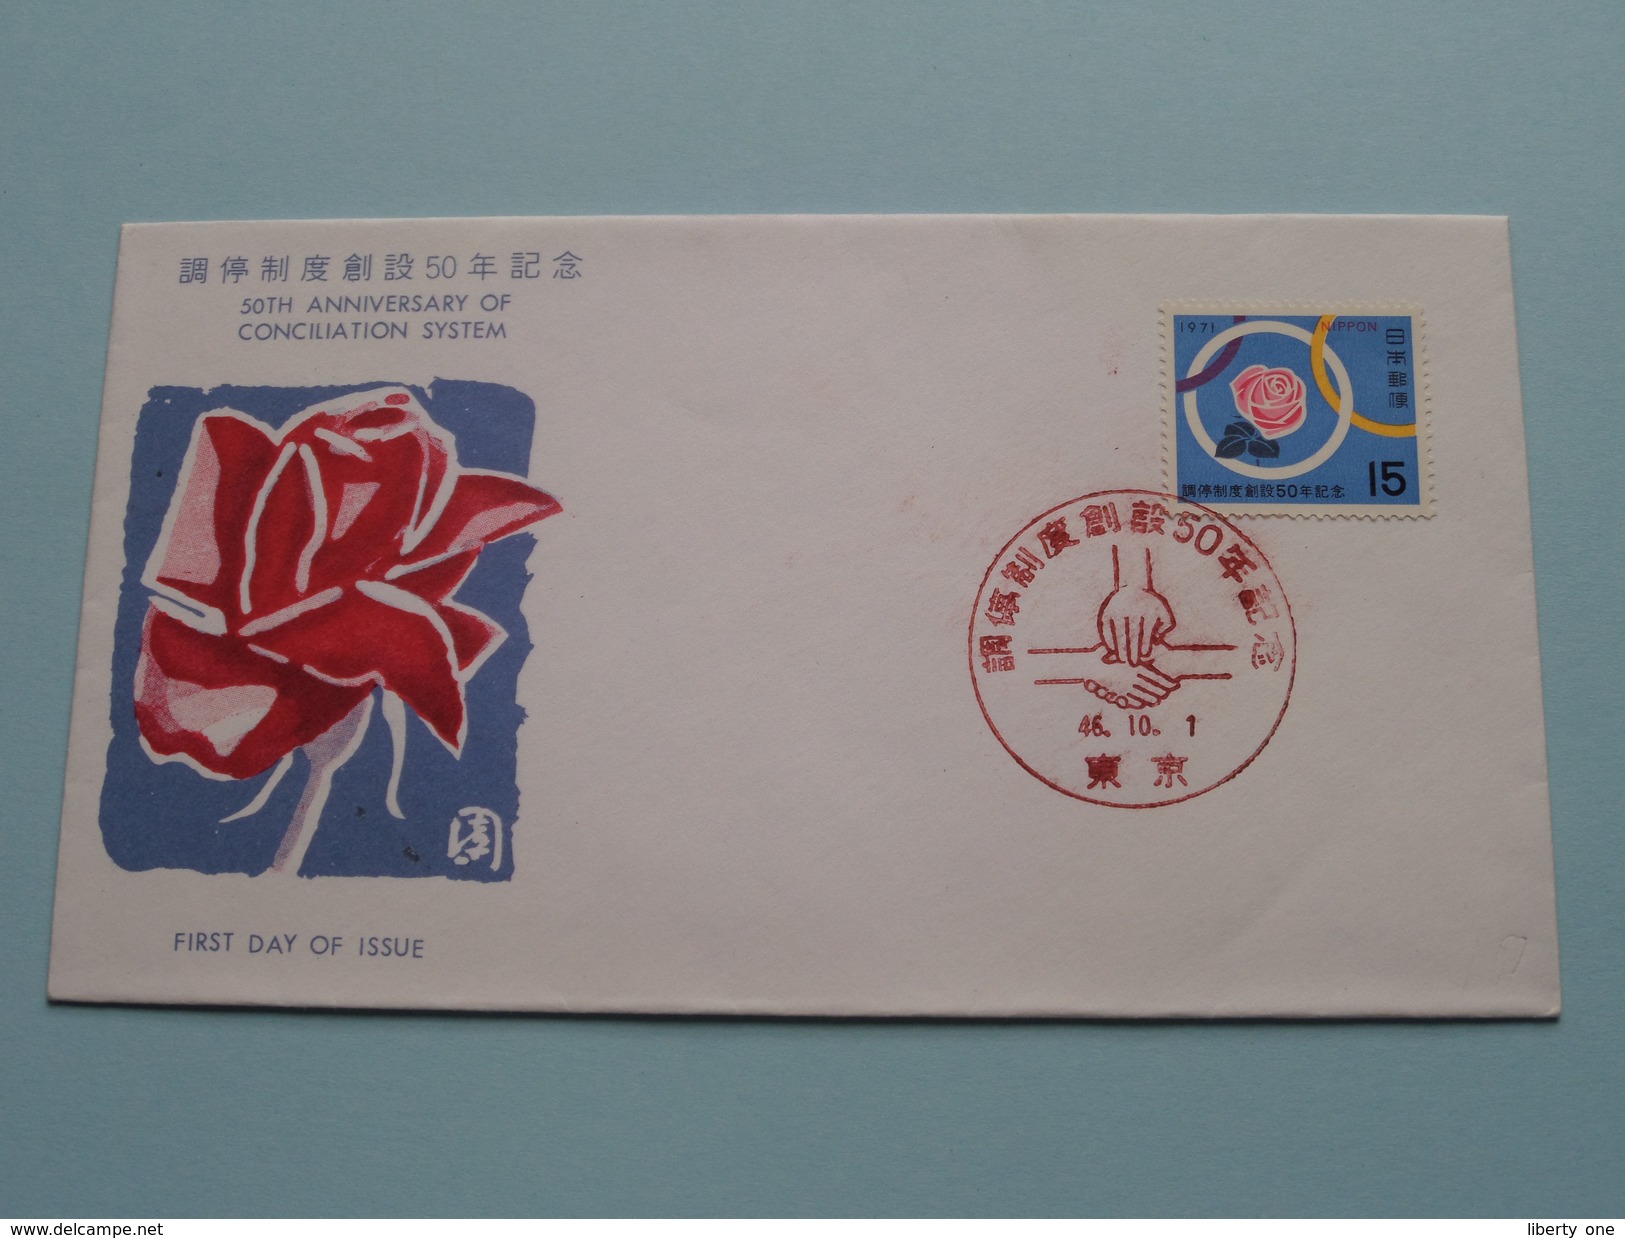 50th ANNIVERSARY OF CONCILIATION SYSTEM 46-10-1 ( The Society For Promotion Of Philately ) ! - FDC